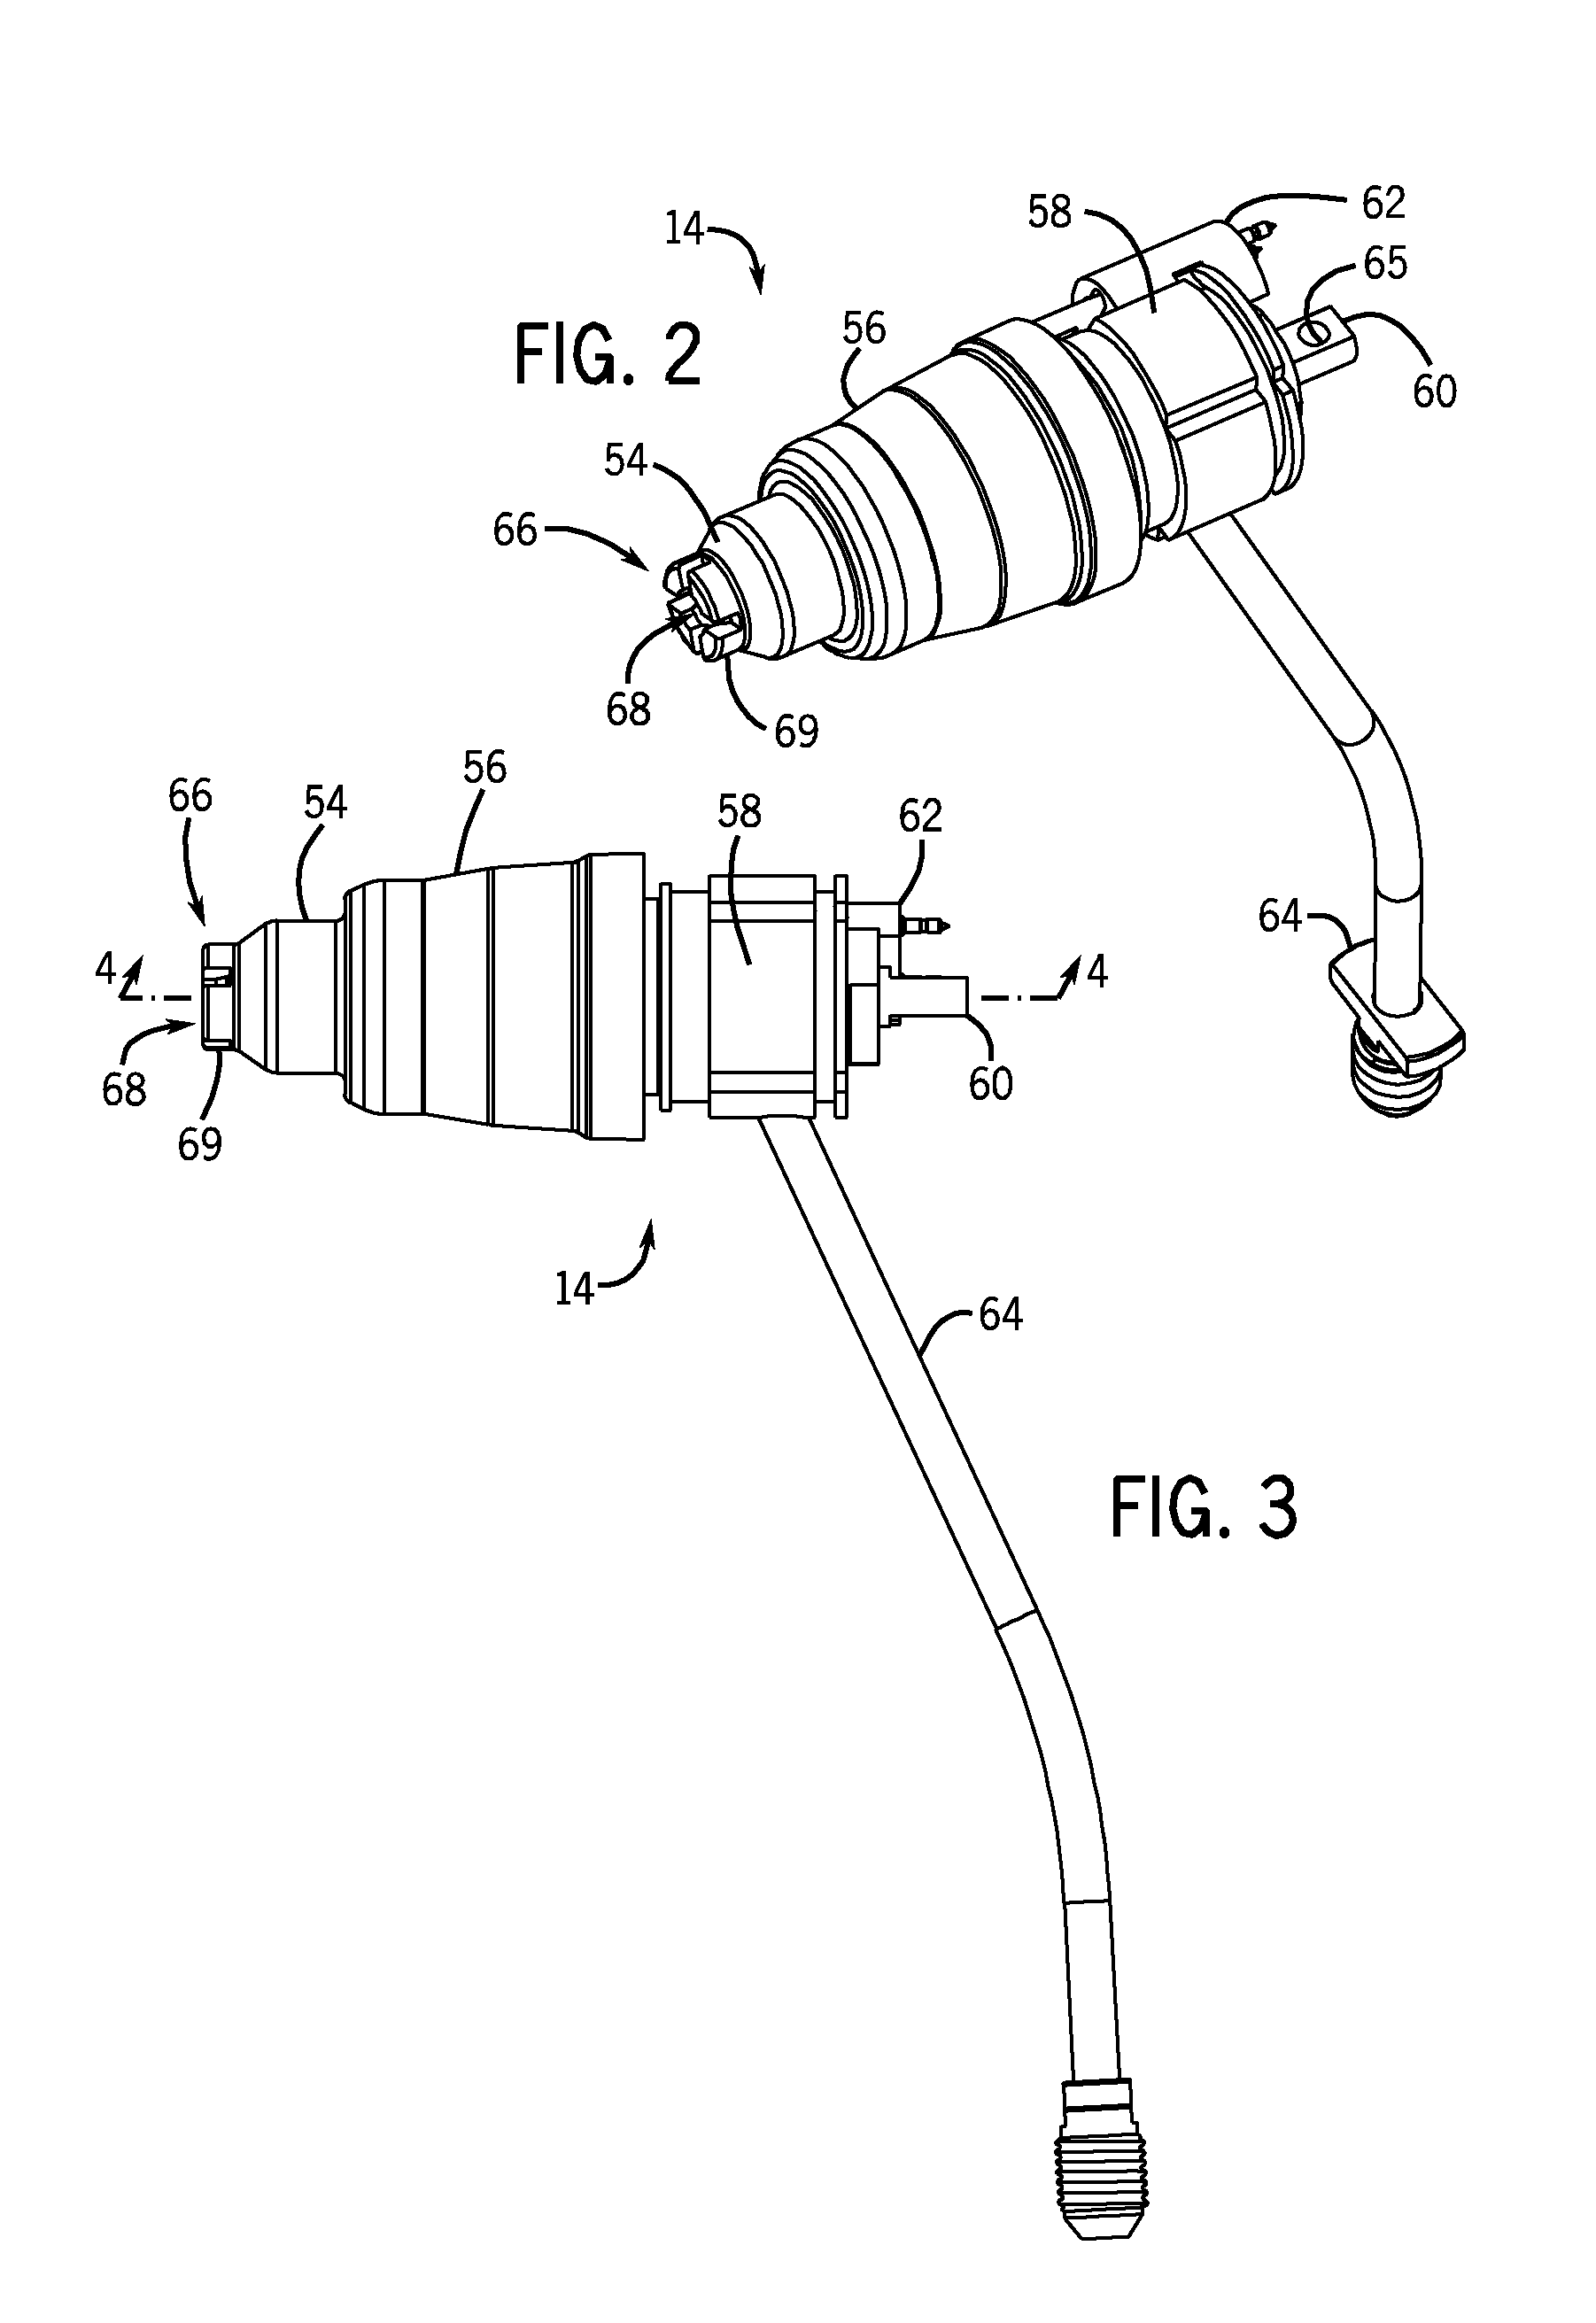 Plasma torch and retaining cap with fast securing threads